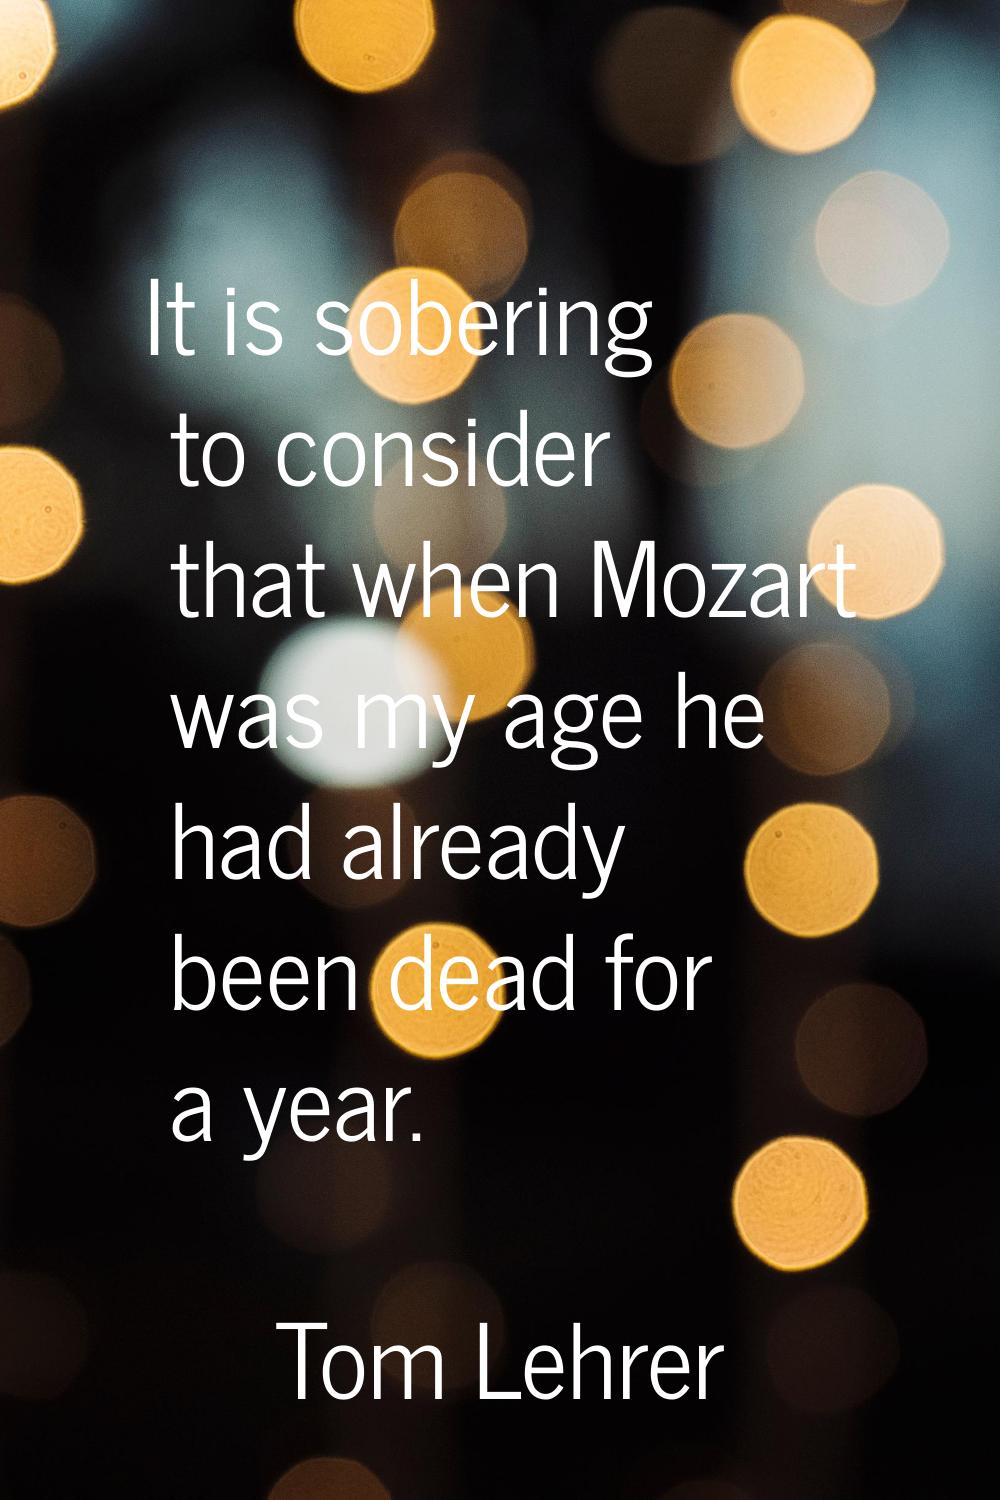 It is sobering to consider that when Mozart was my age he had already been dead for a year.